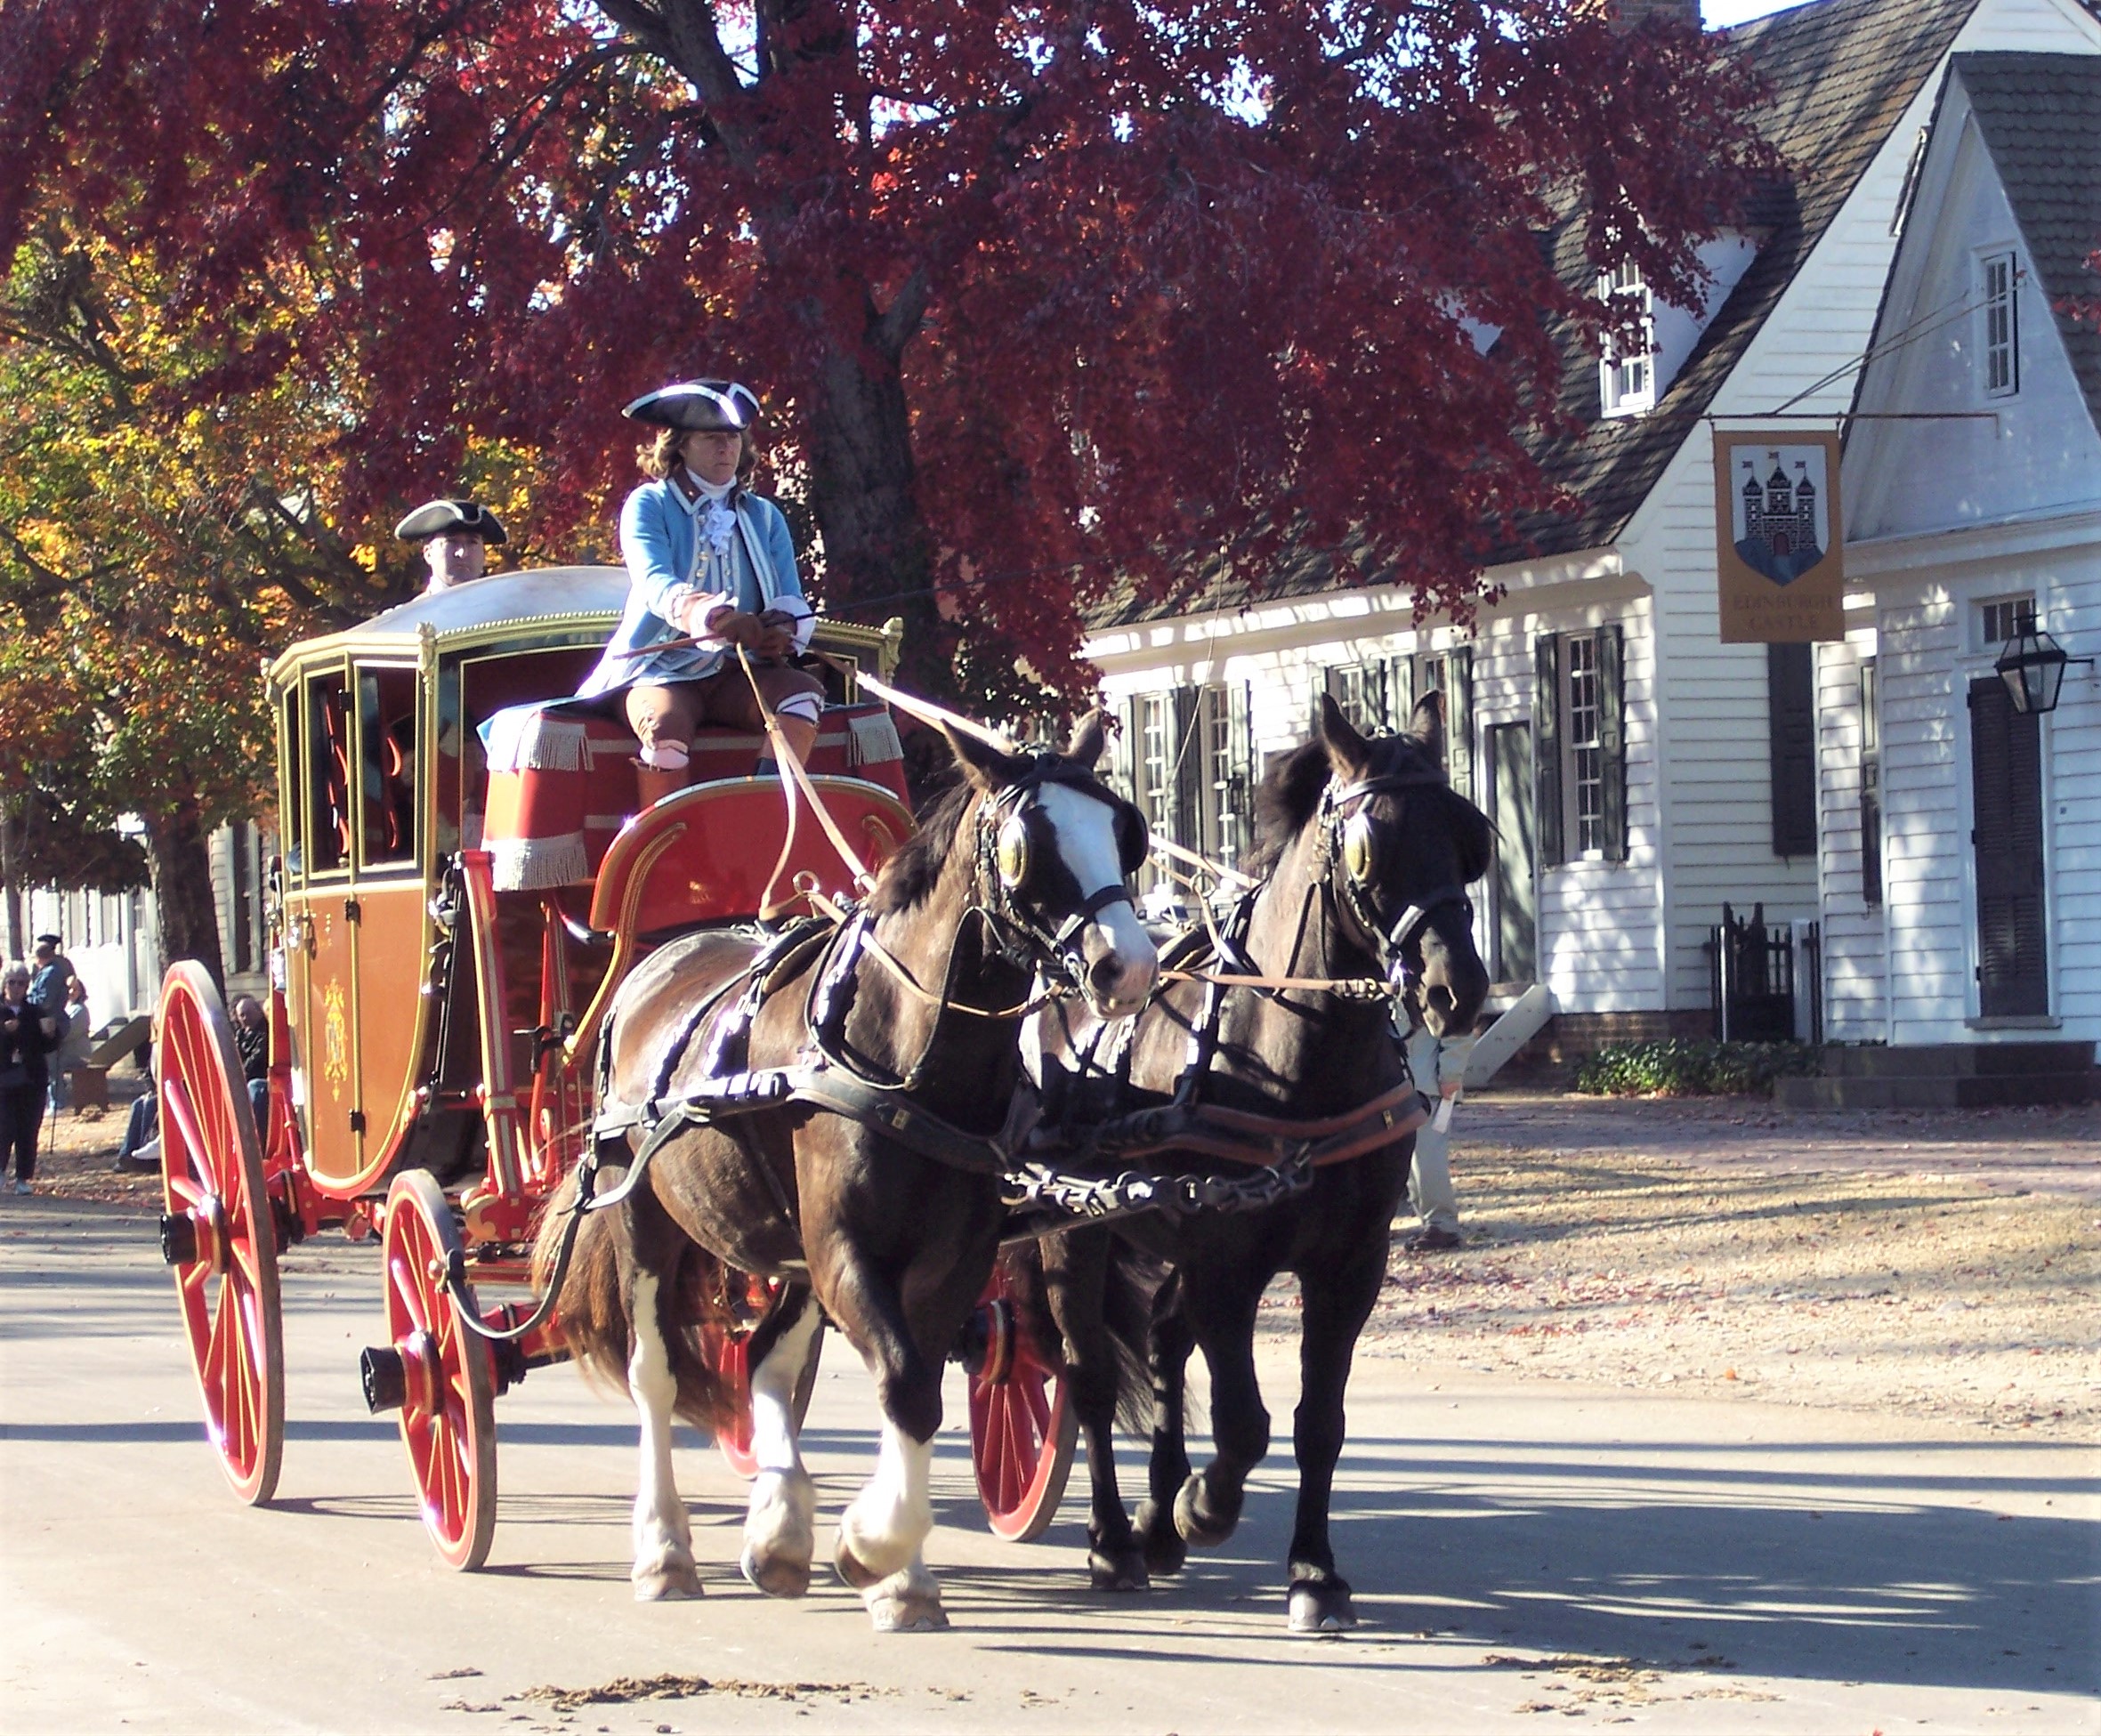 Strolling through Colonial Williamsburg seems as though one has "stepped back in time" with authentic transportation and "locals" in Colonial attire, not to mention the historic buildings. Photo by Susan J. Young. 